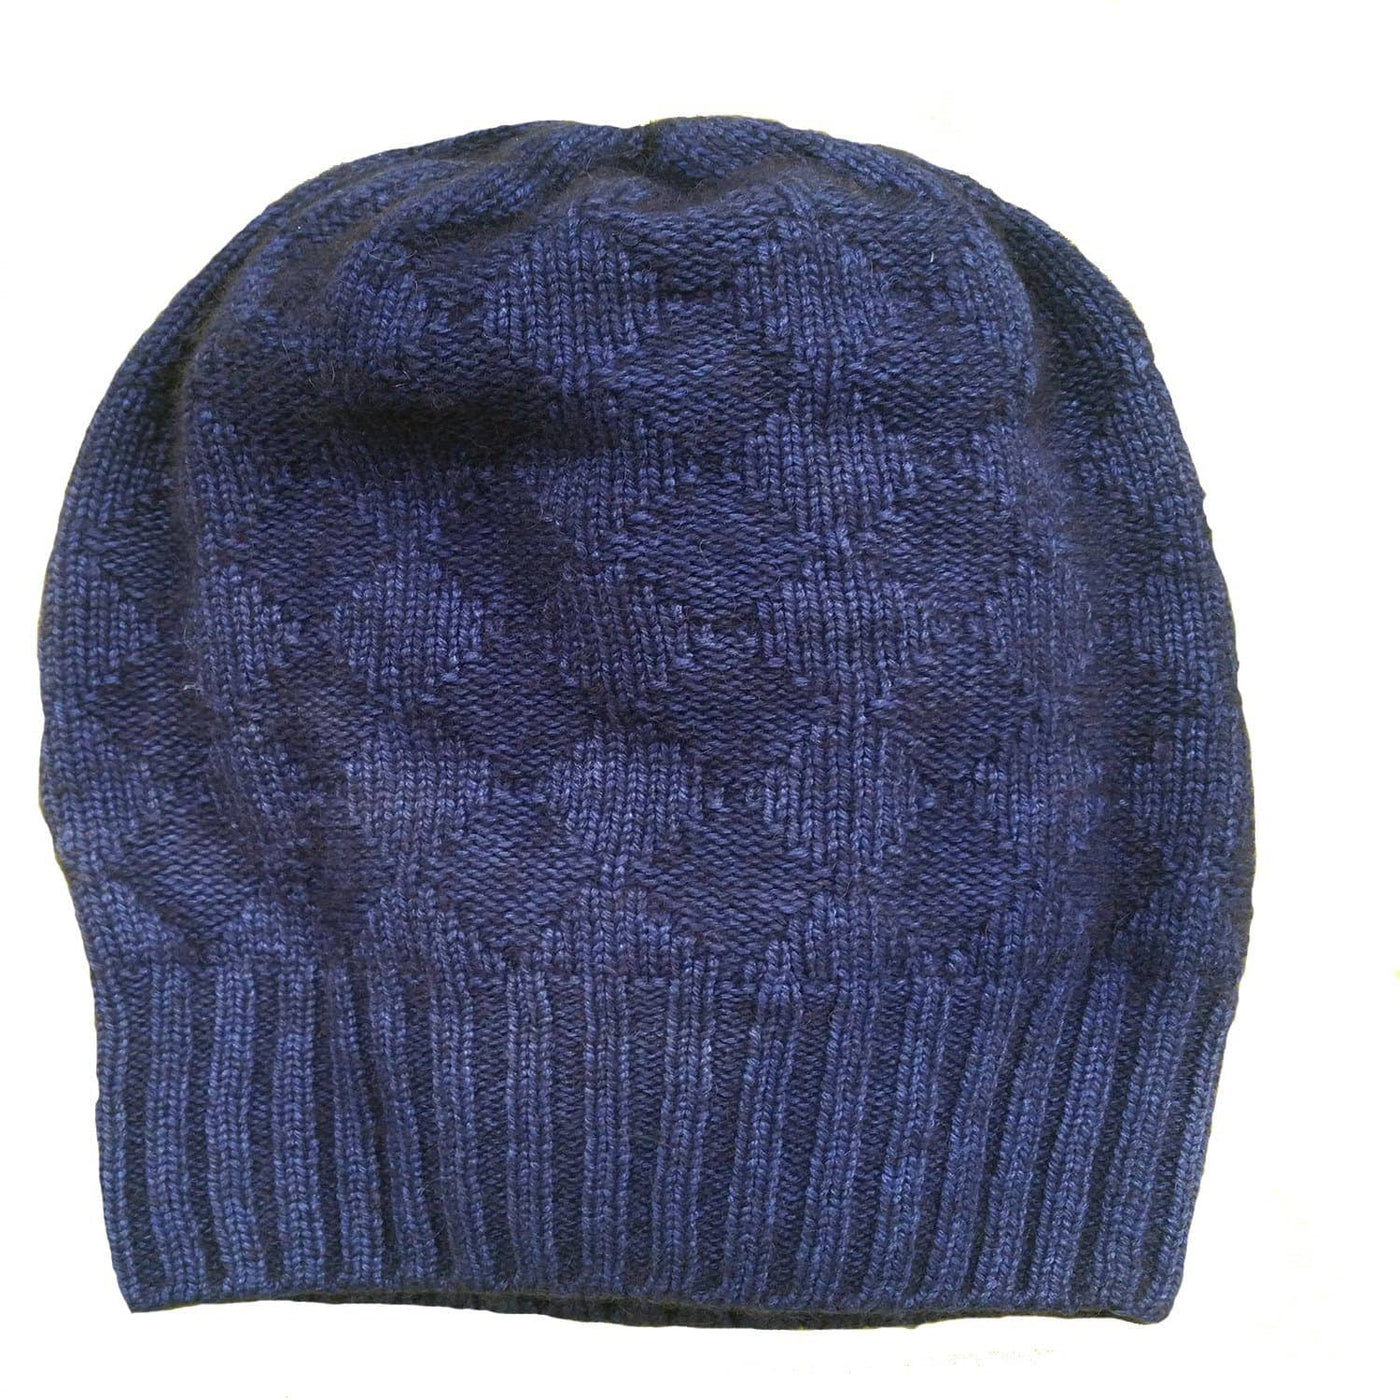 Slouchy Bison/Silk Knitted Hat Bison Gear The Buffalo Wool Co. Navy 